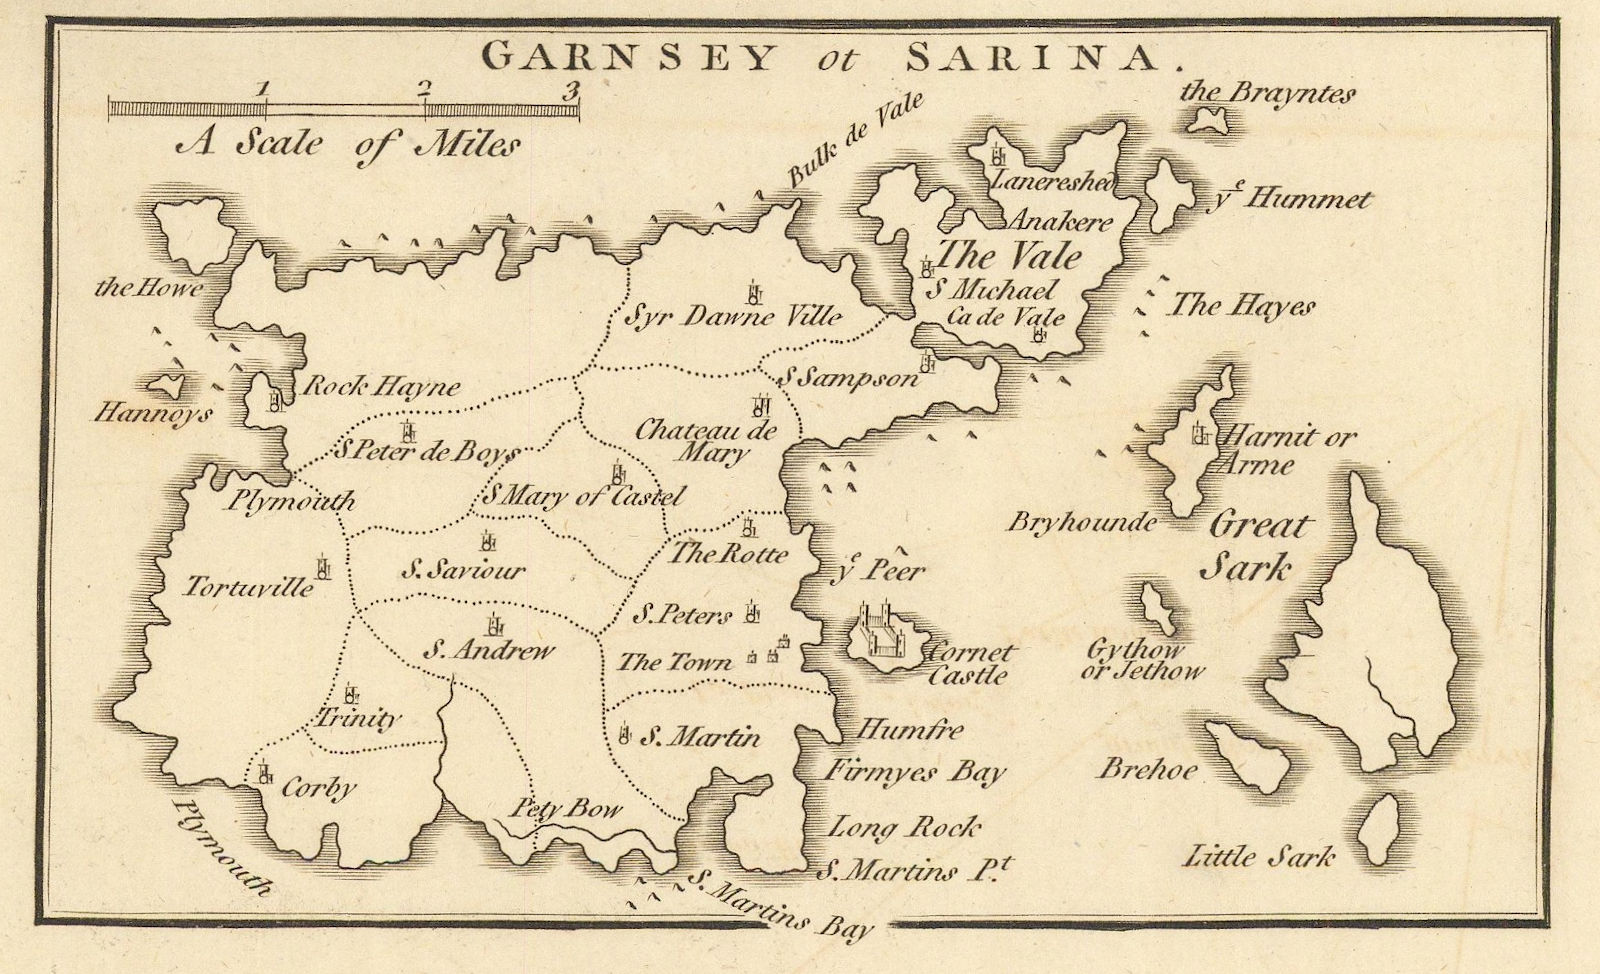 Associate Product "Garnsey or Sarina" by John CARY. Guernsey, Channel Islands. SMALL 1806 map